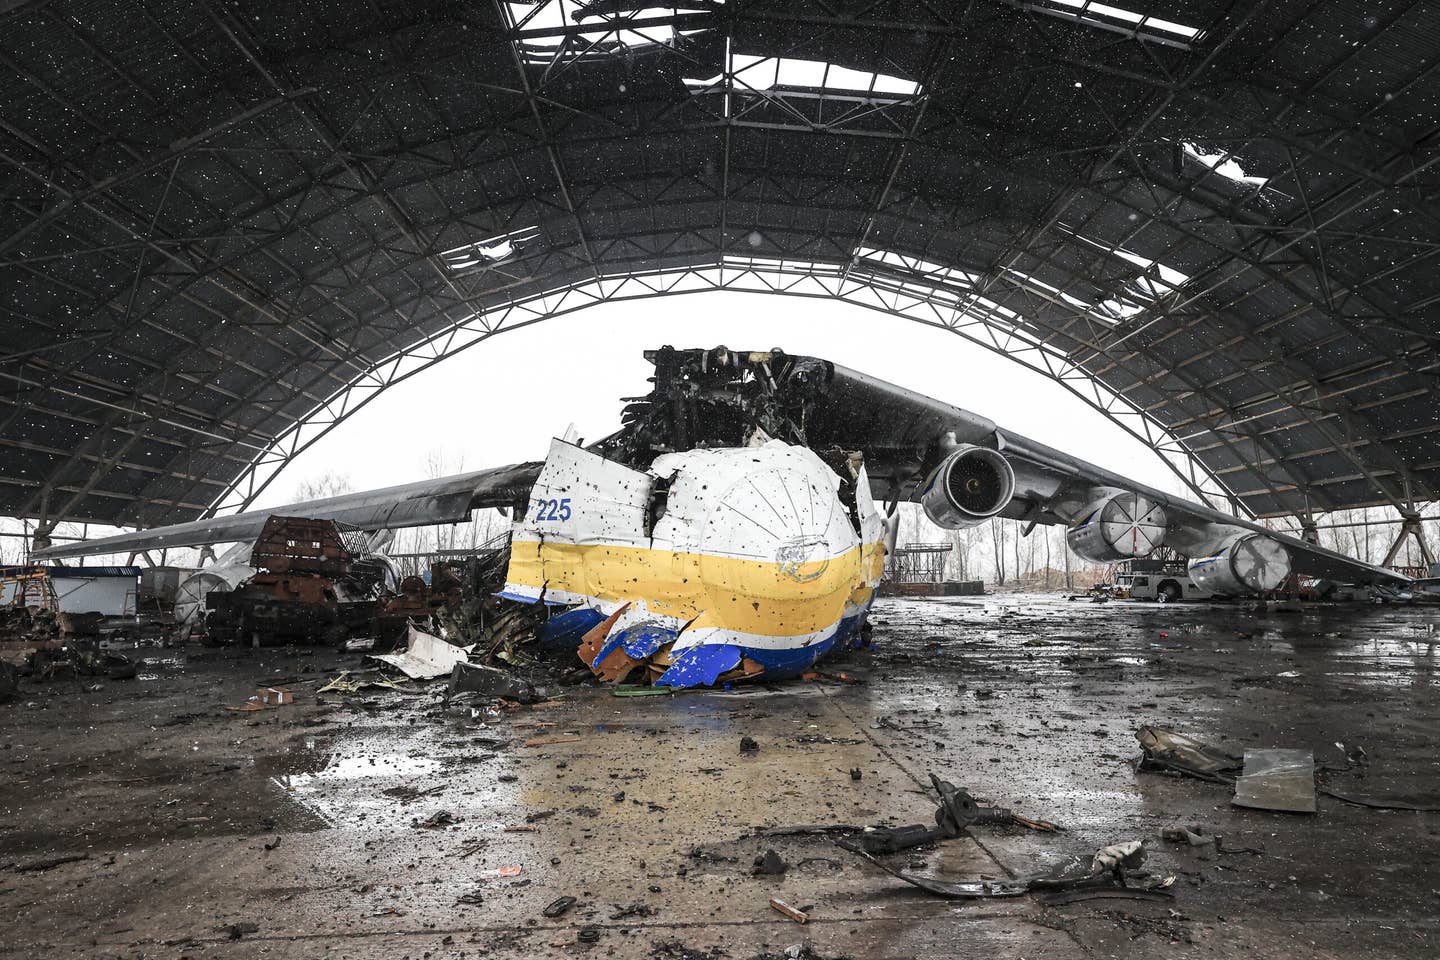 A view of the wreckage of Antonov An-225 Mriya cargo plane, the world's biggest aircraft, destroyed by Russian forces. (Photo by Metin Aktas/Anadolu Agency via Getty Images)